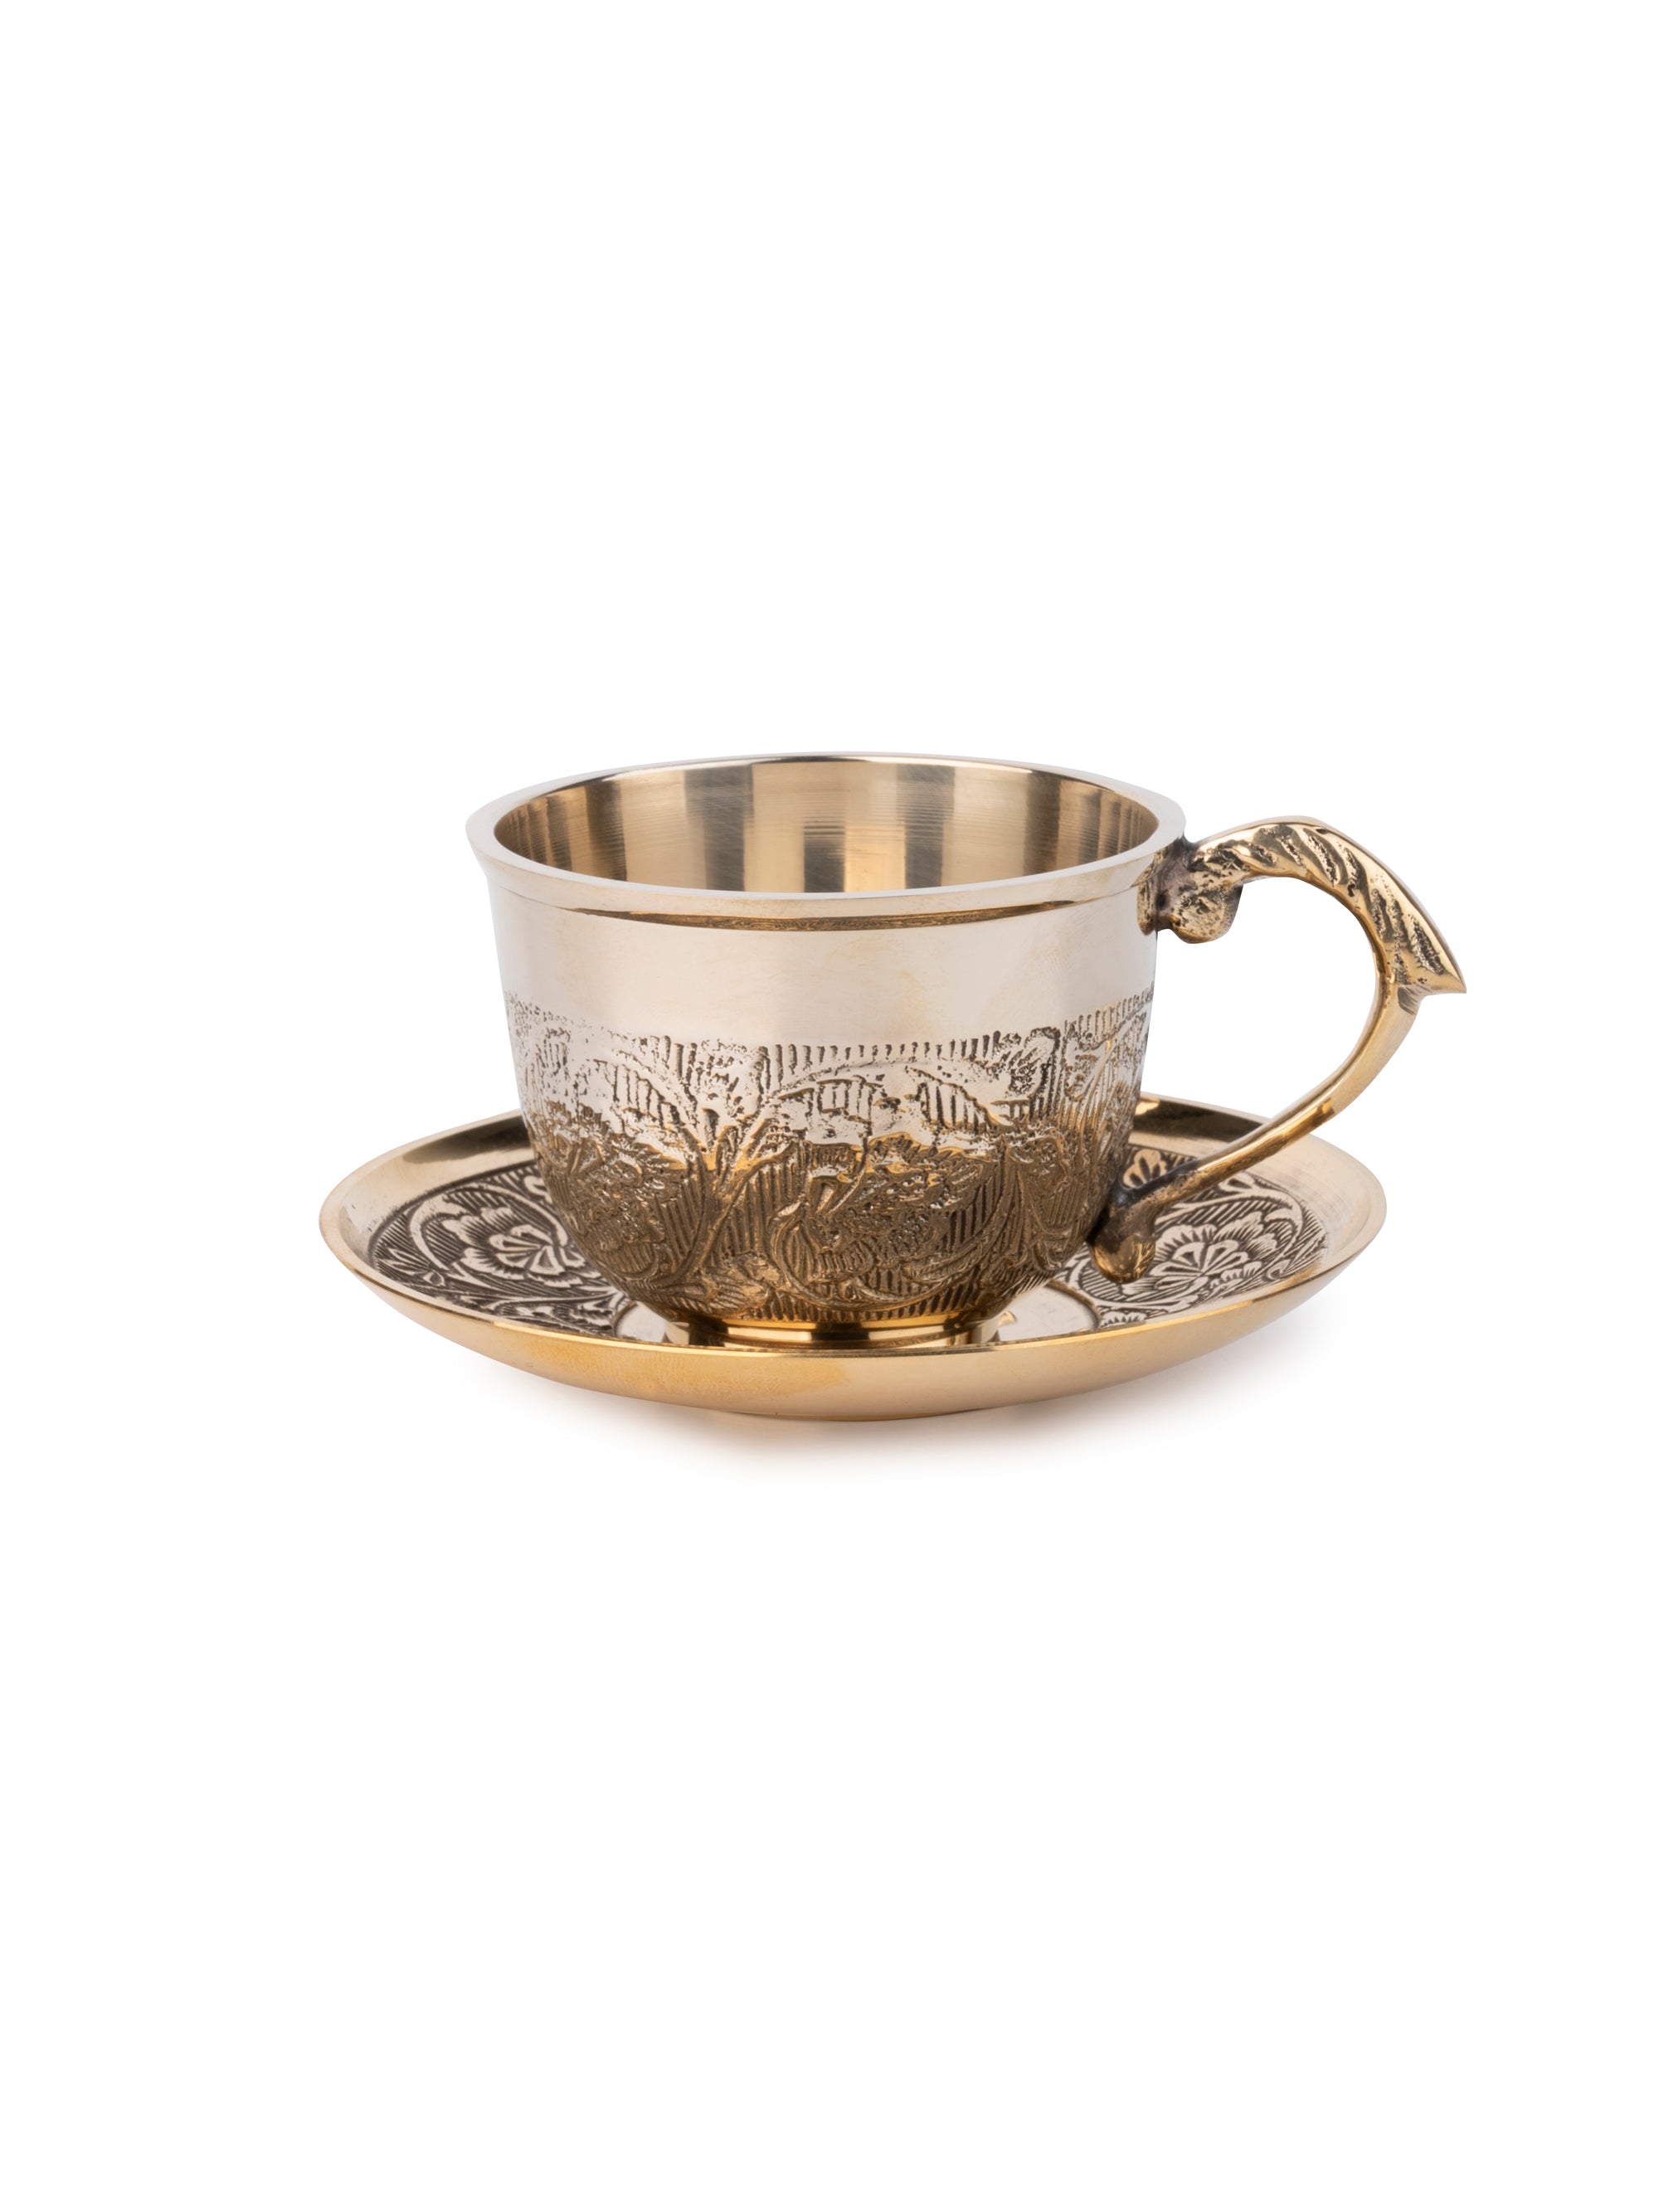 Brass Engraved Cup and Saucer set for serving Tea / Coffee